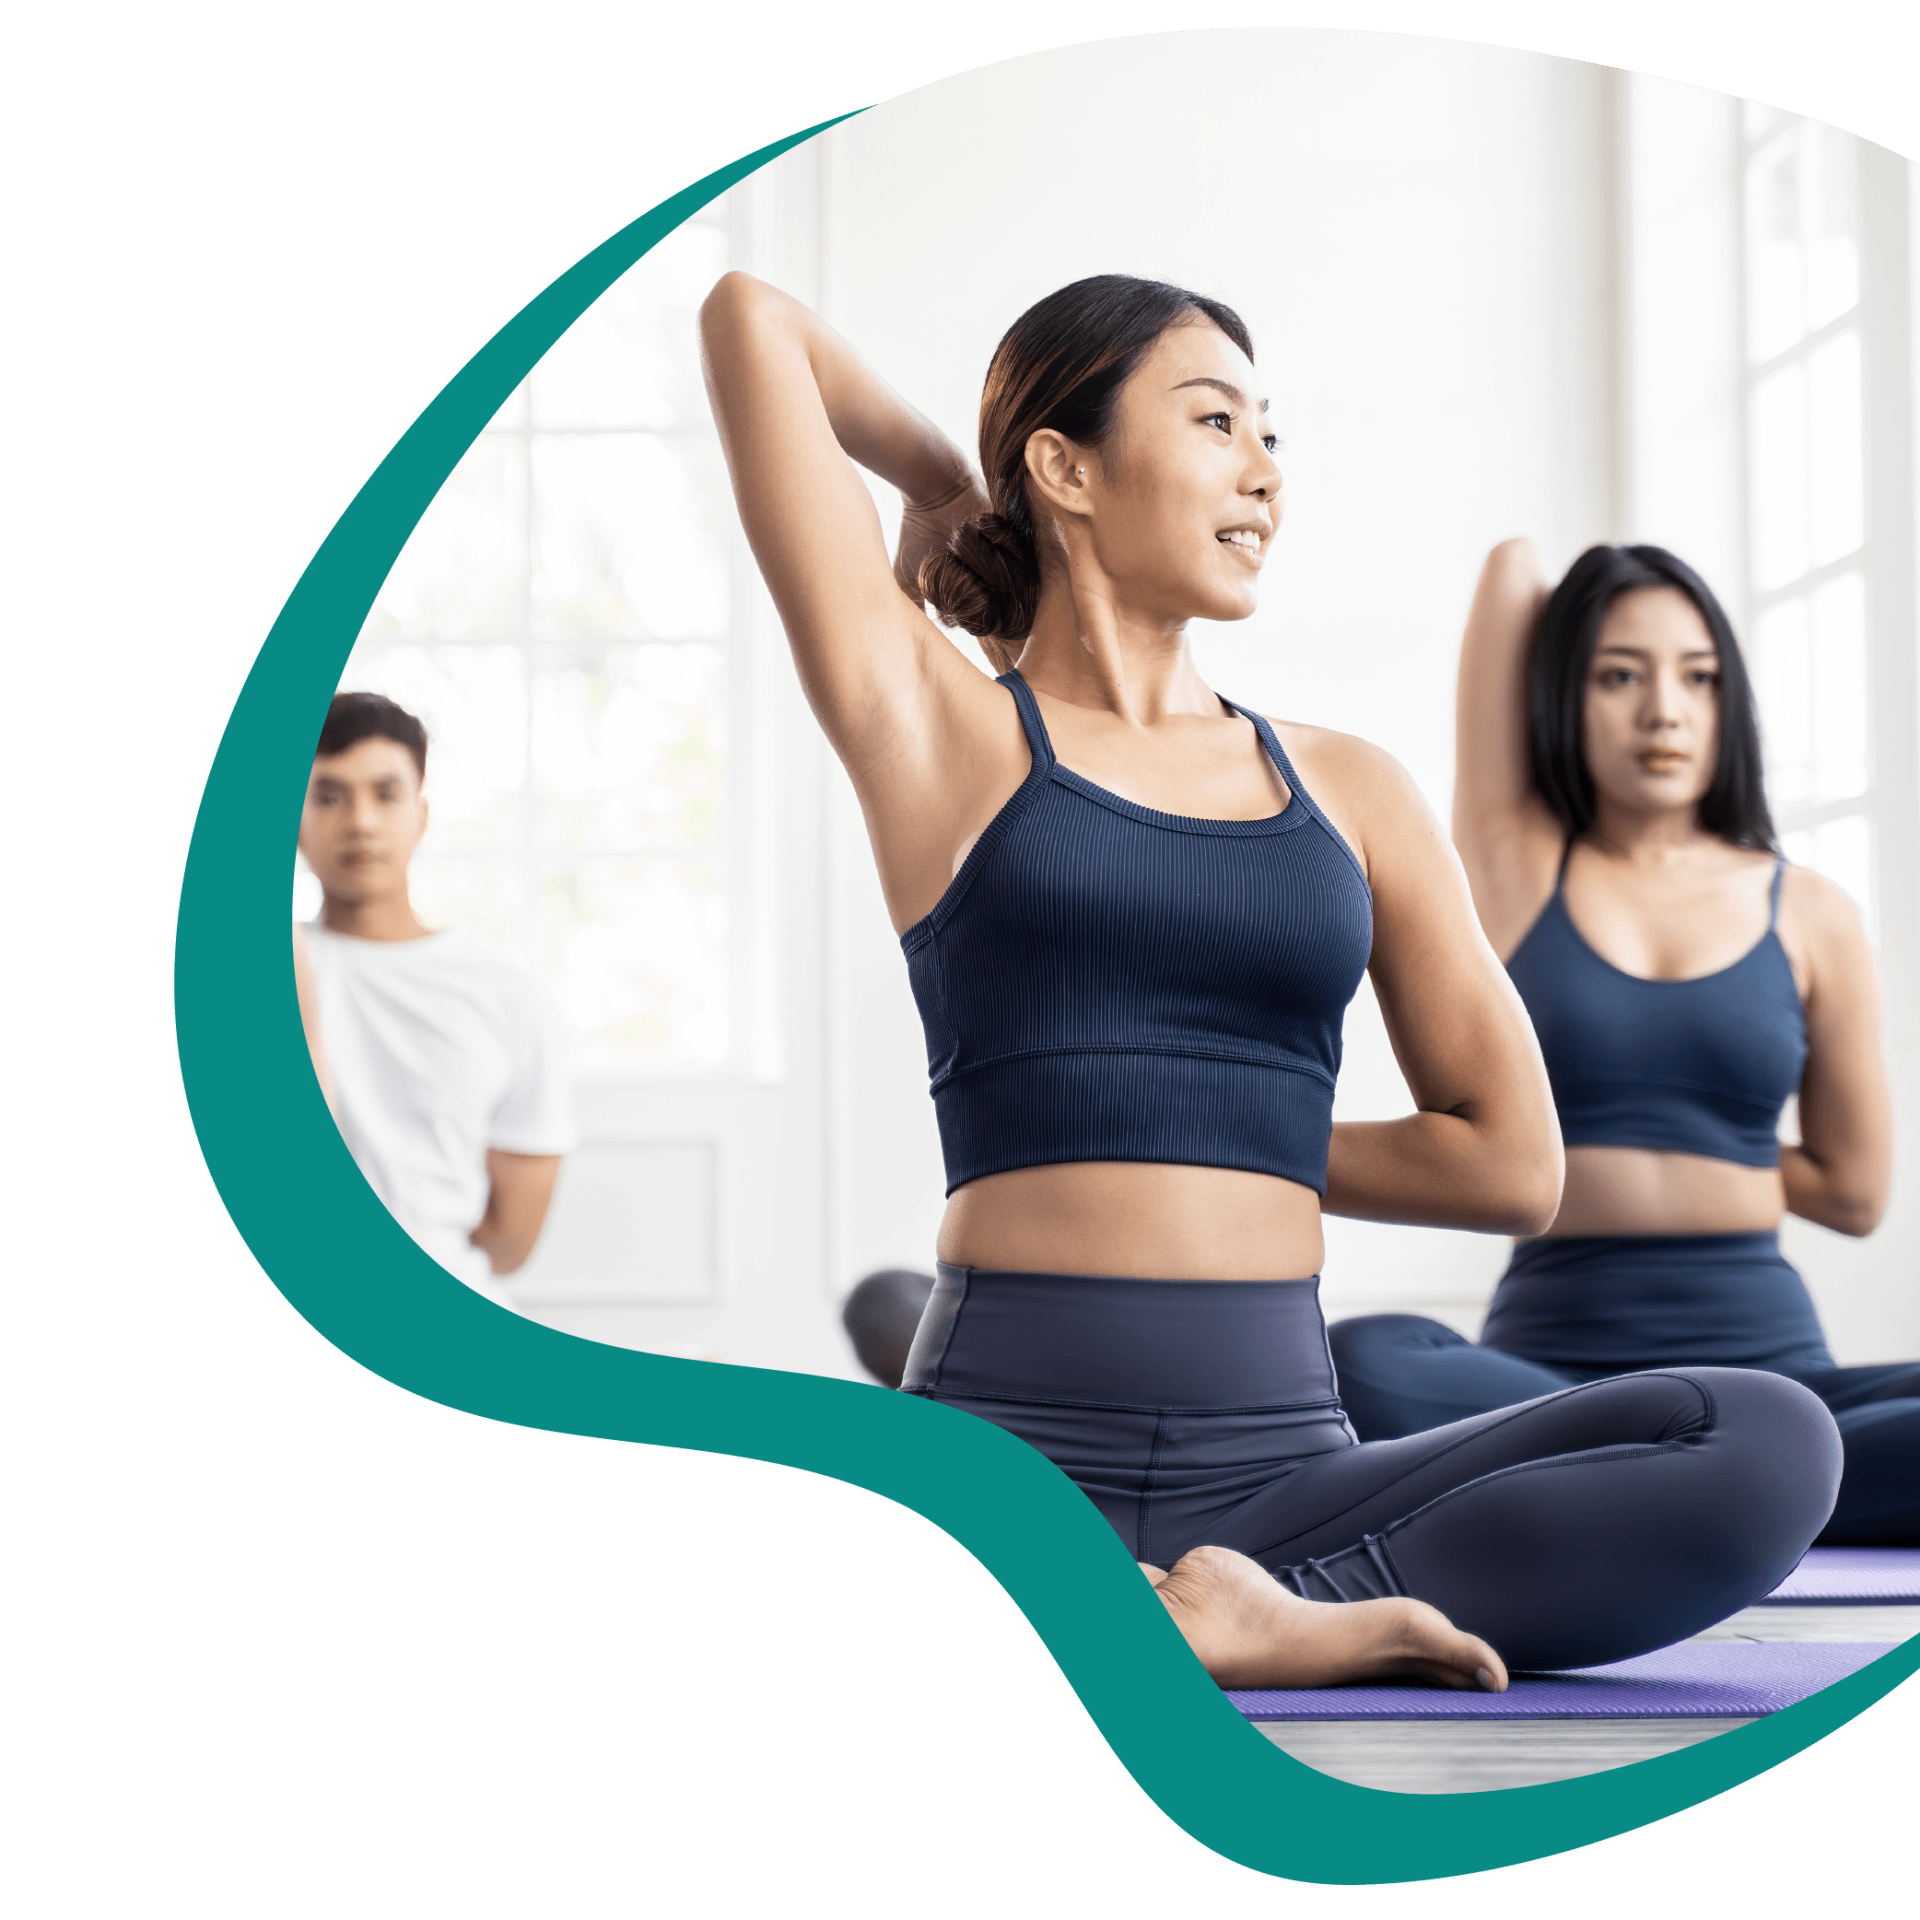 Young Asian group sporty attractive people learning yoga lesson with coach trainer. Instructor woman leading exercise pose, healthy lifestyle in fitness studio. Sport gymnastics, ballet dancing class.